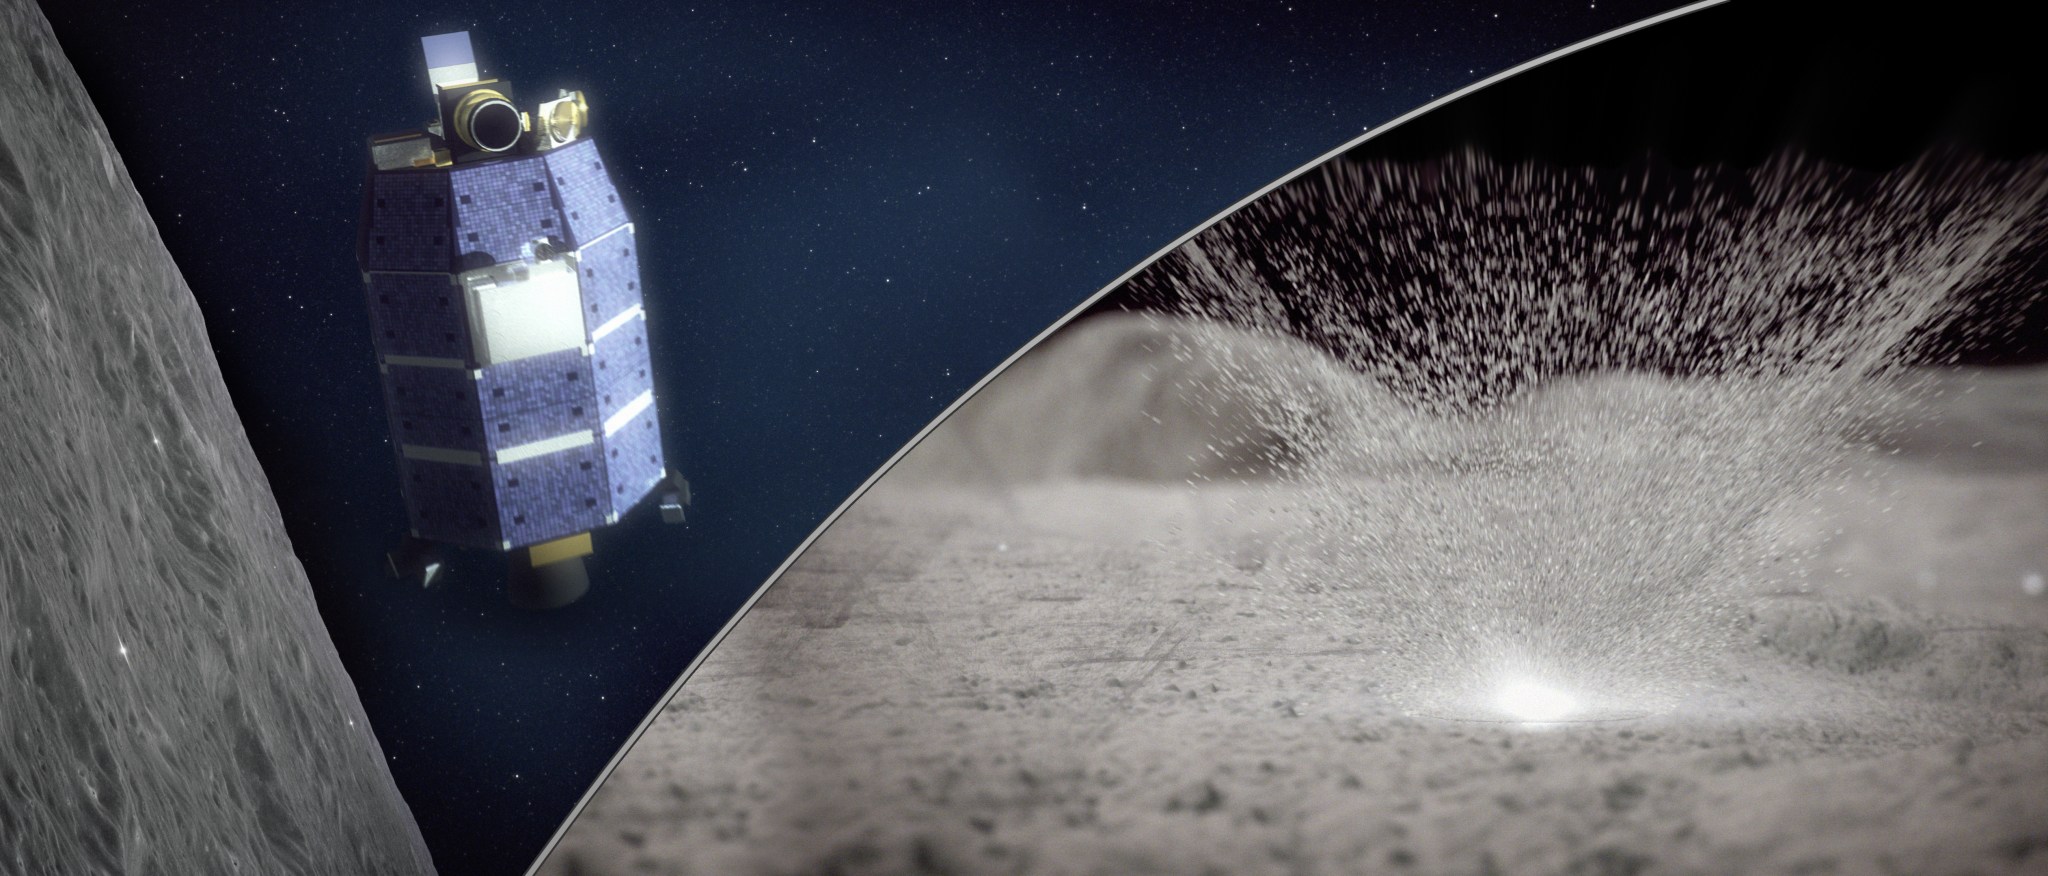 Artist’s concept of the LADEE spacecraft detecting water vapor from meteoroid impacts on the Moon.